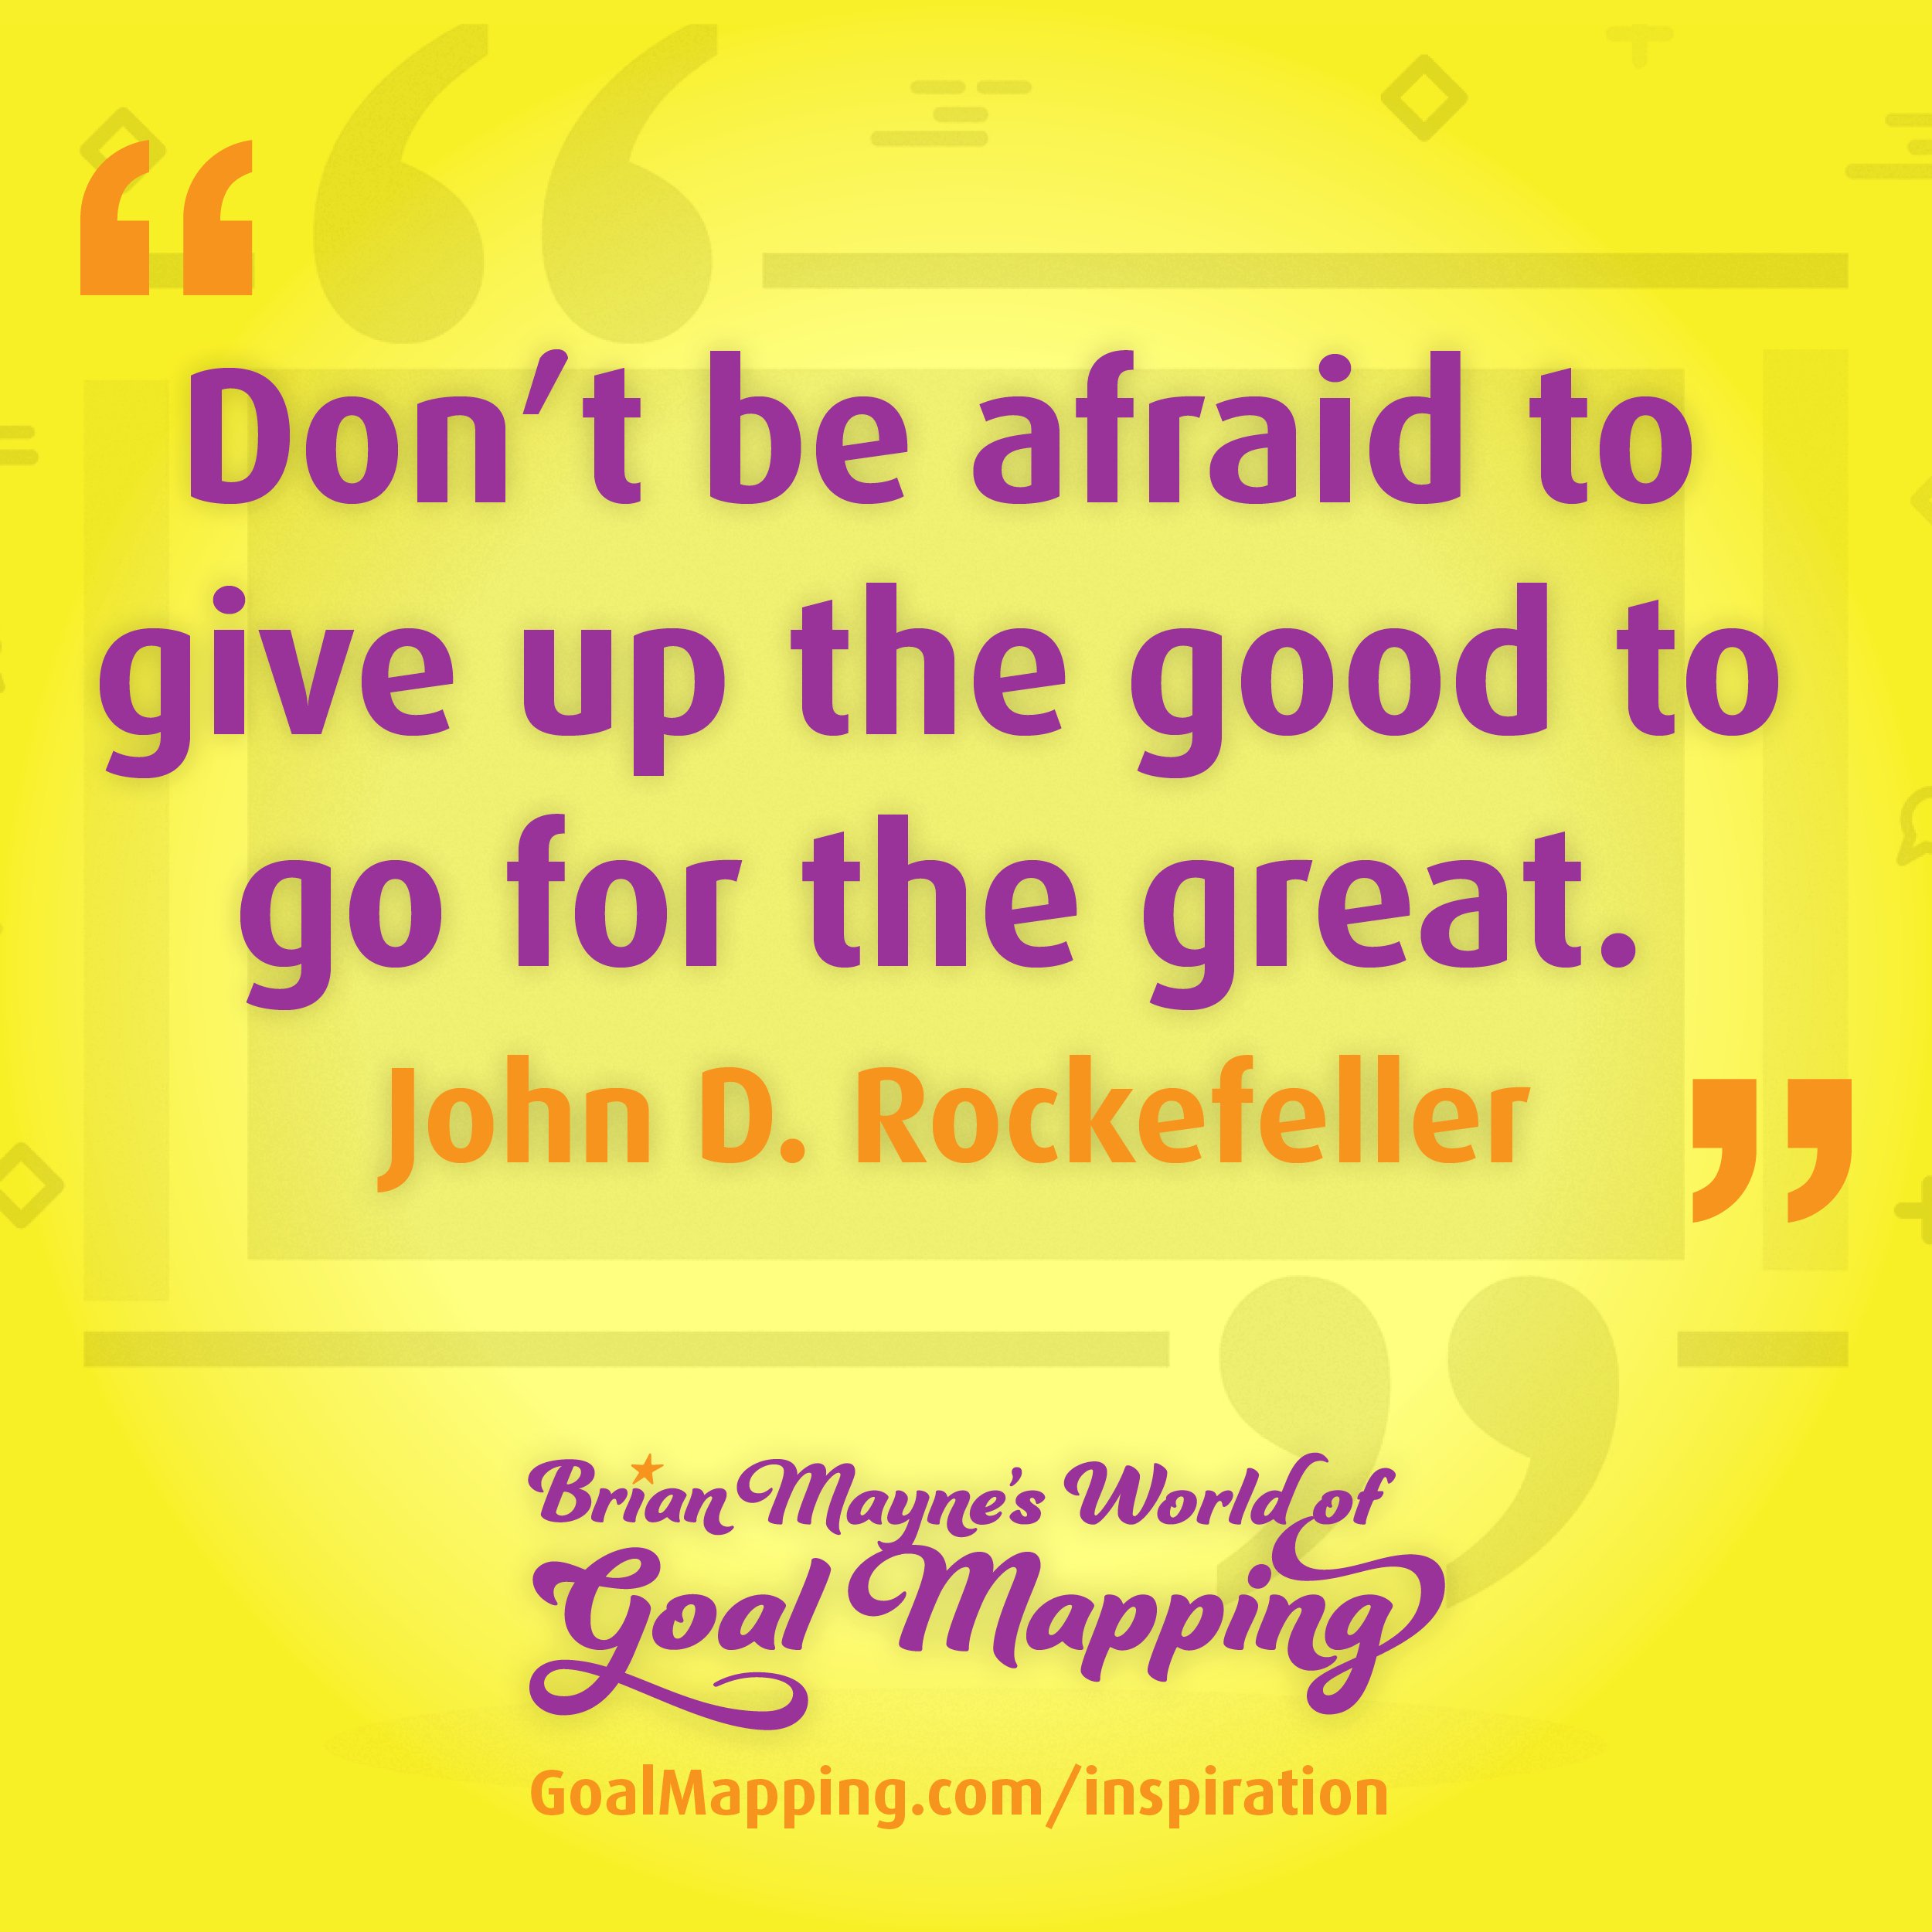 "Don’t be afraid to give up the good to go for the great." John D. Rockefeller